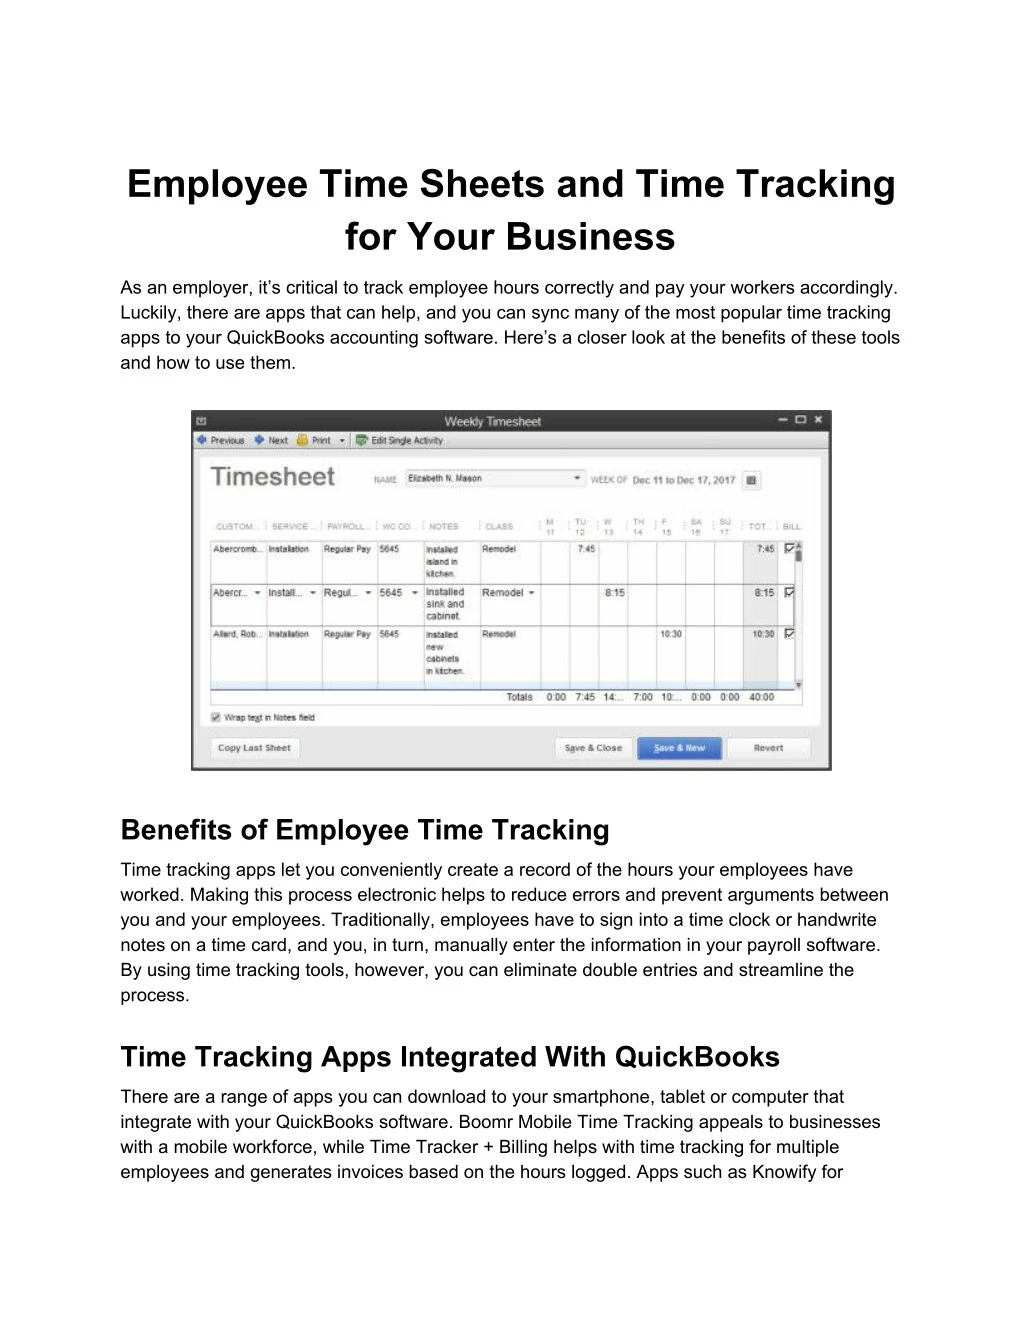 employee time sheets and time tracking for your